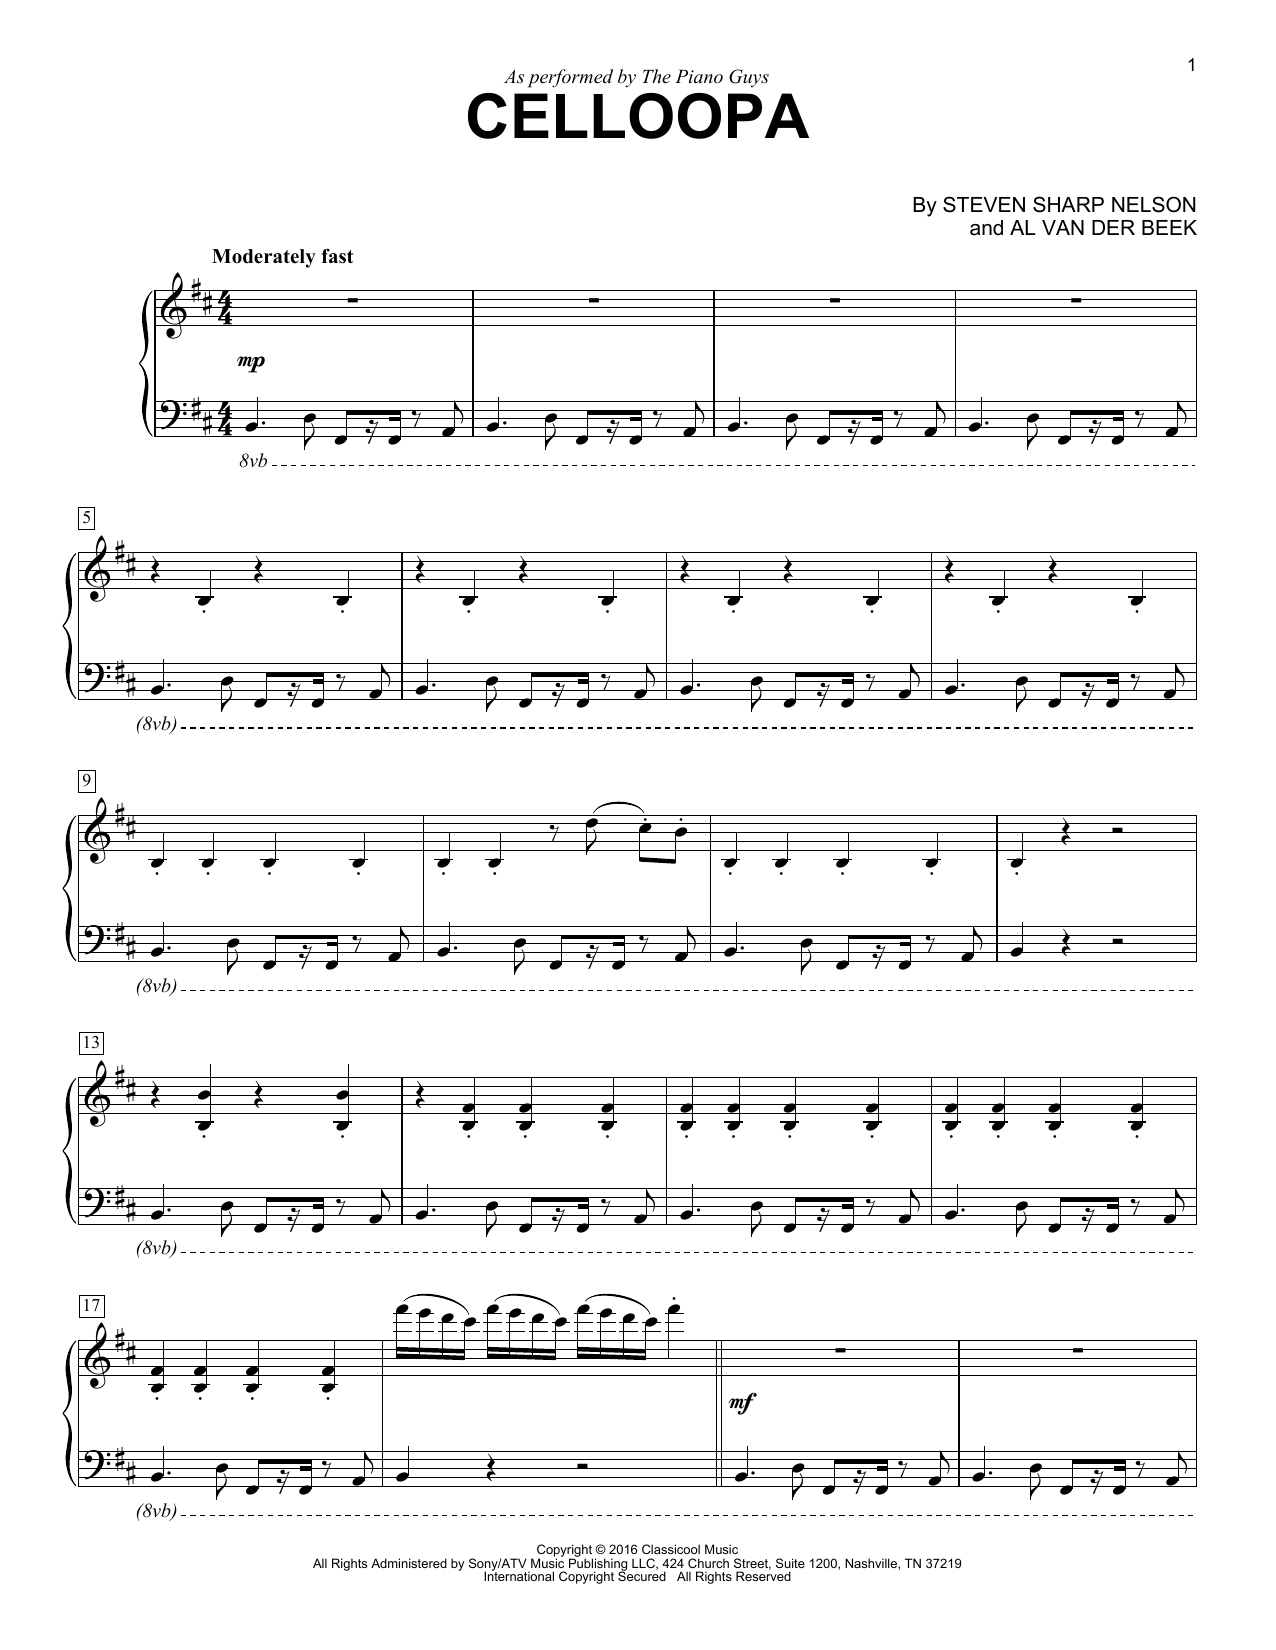 Download The Piano Guys Celloopa Sheet Music